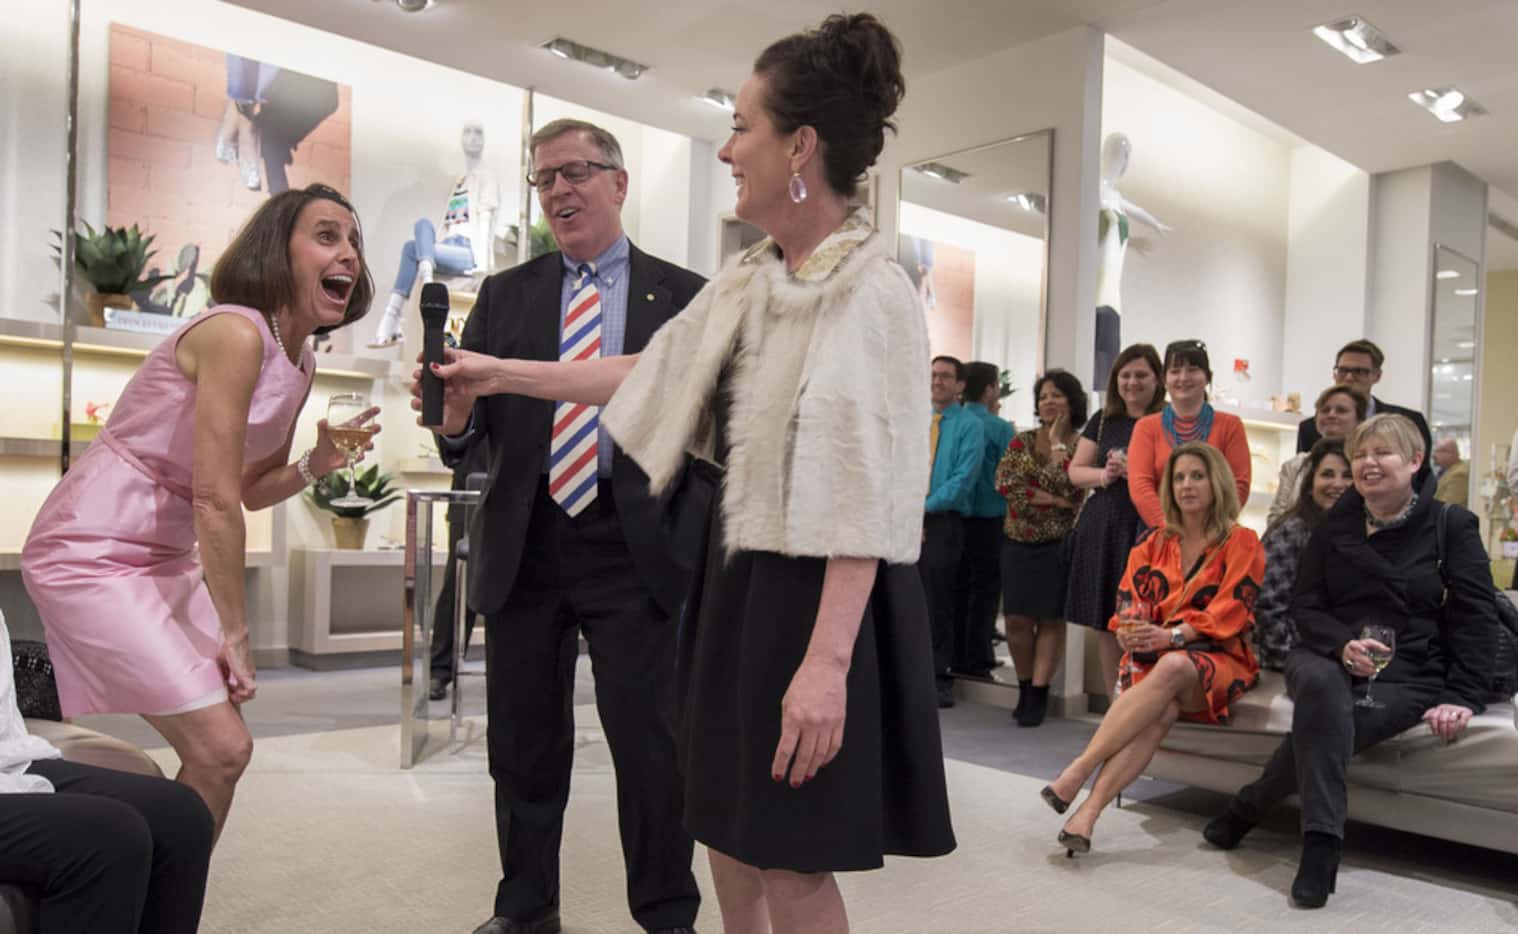 In 2016, Amy Thompson (left) reacted as Kate Spade hands her the microphone while Mark...